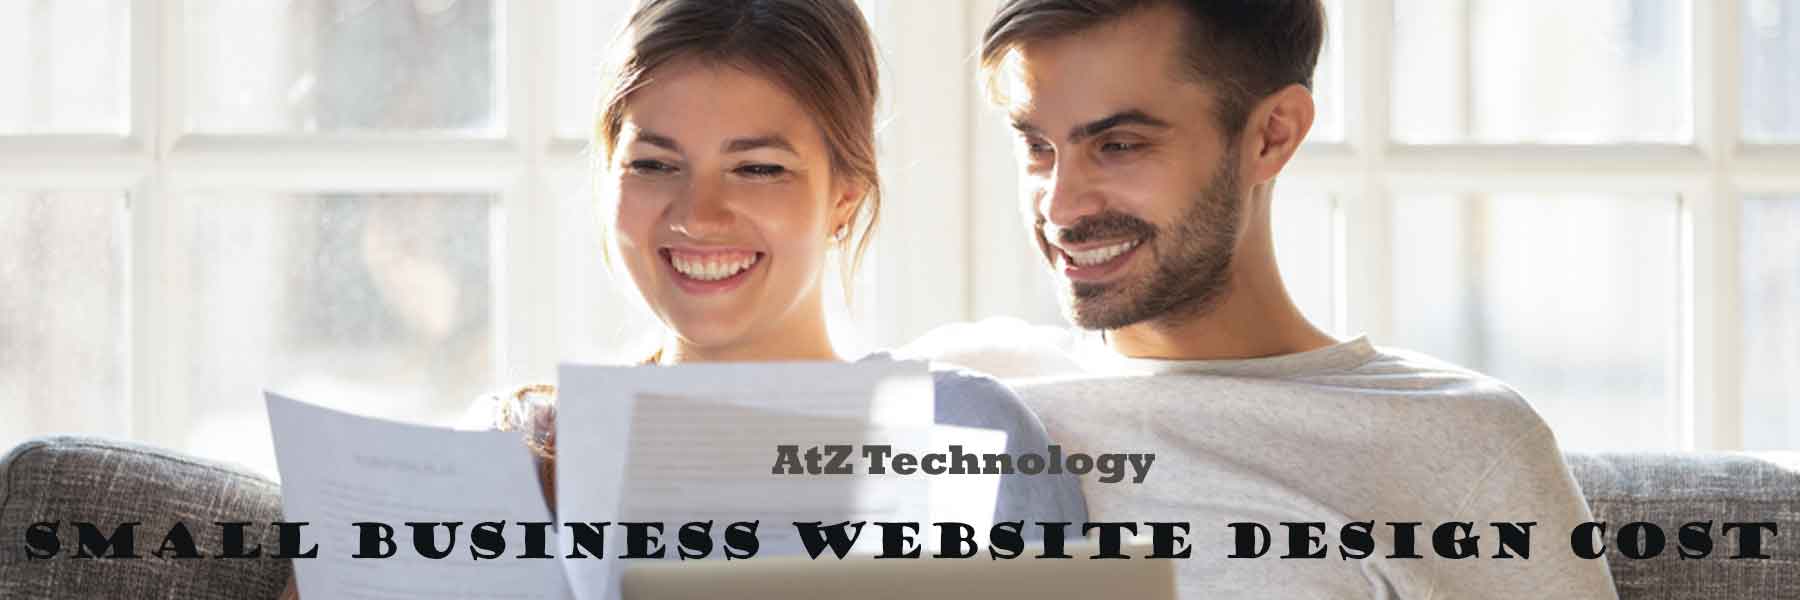 Small Business Website Design Cost